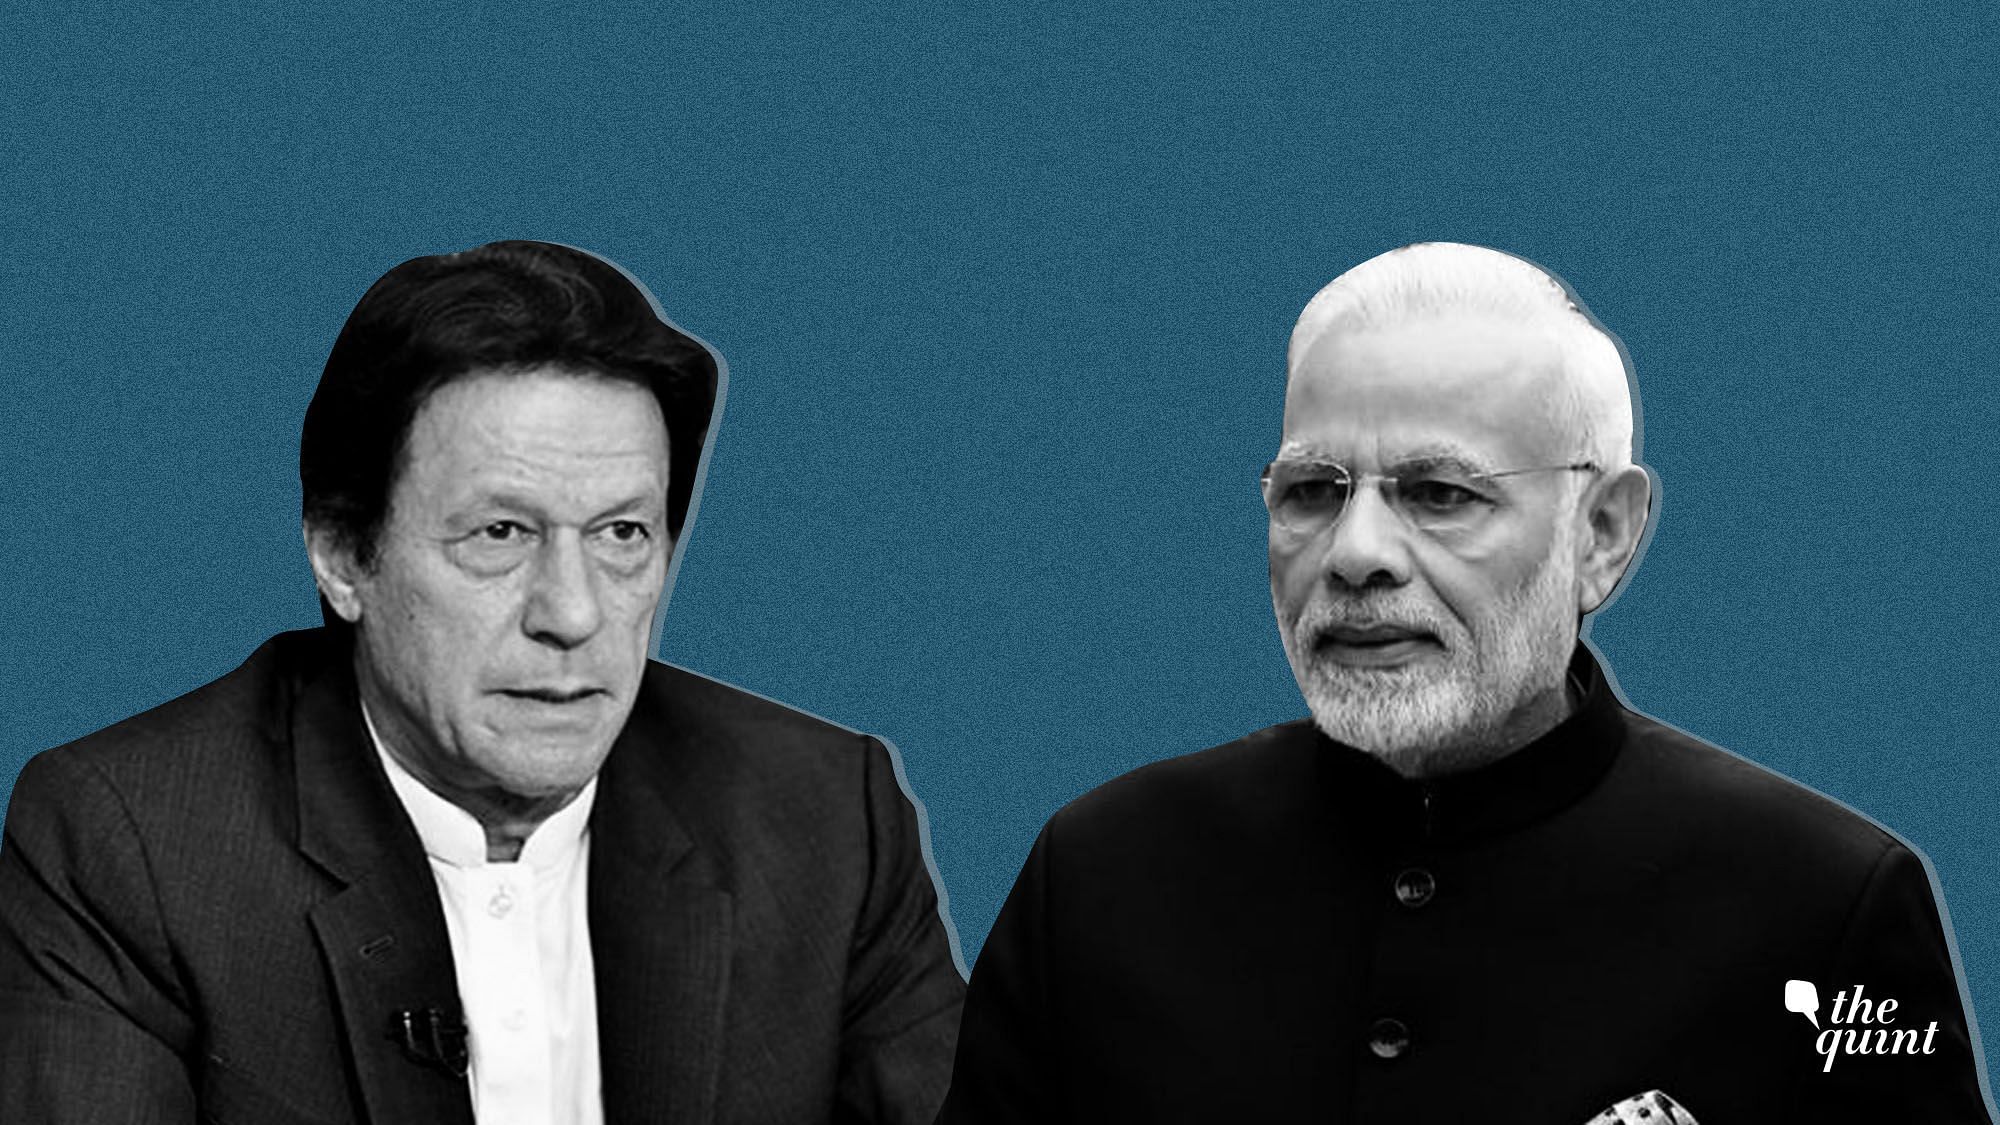 Pakistan Prime Minister Imran Khan has said that there may be a better chance of peace talks with India if Modi returns to power.